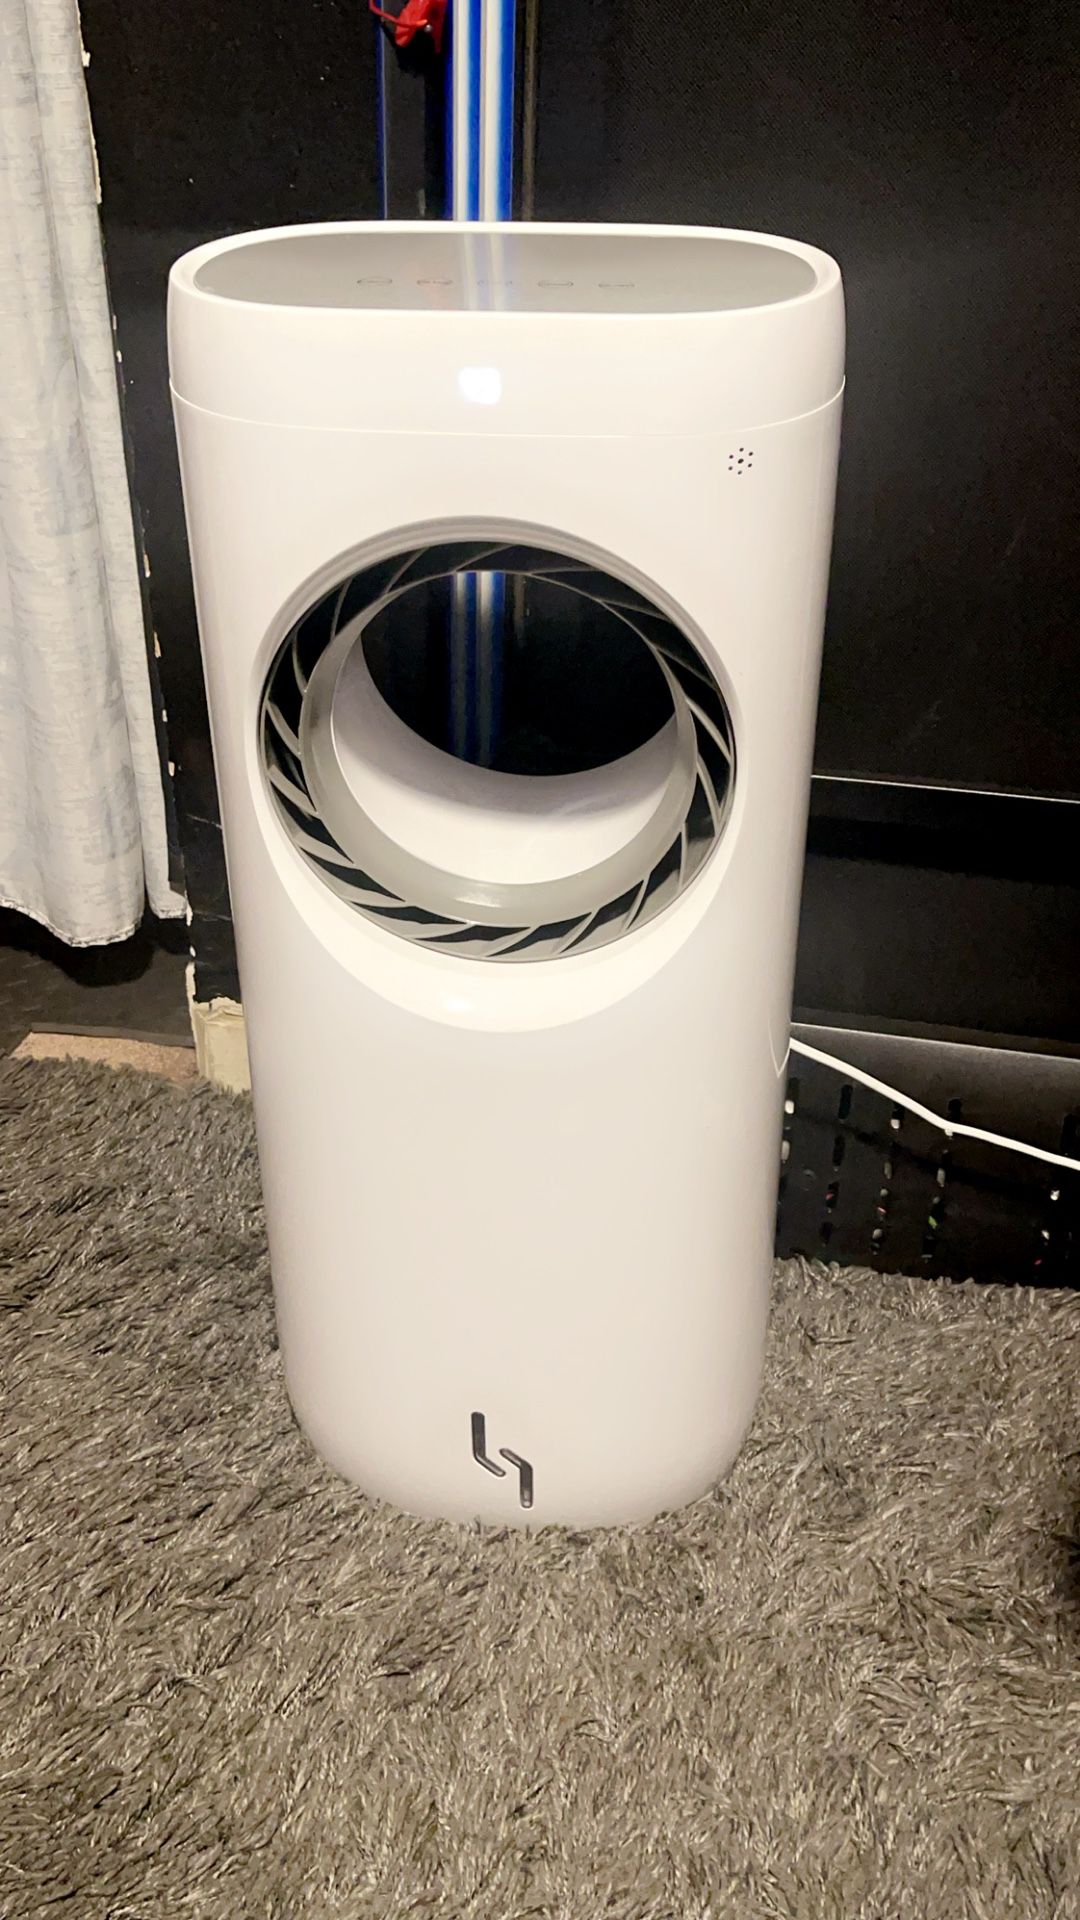 Messenger Evaporative Air Cooler - Trustech Portable Air Cooler, Cool & Humidifying $65 • Message sent to seller See conversation Review selle